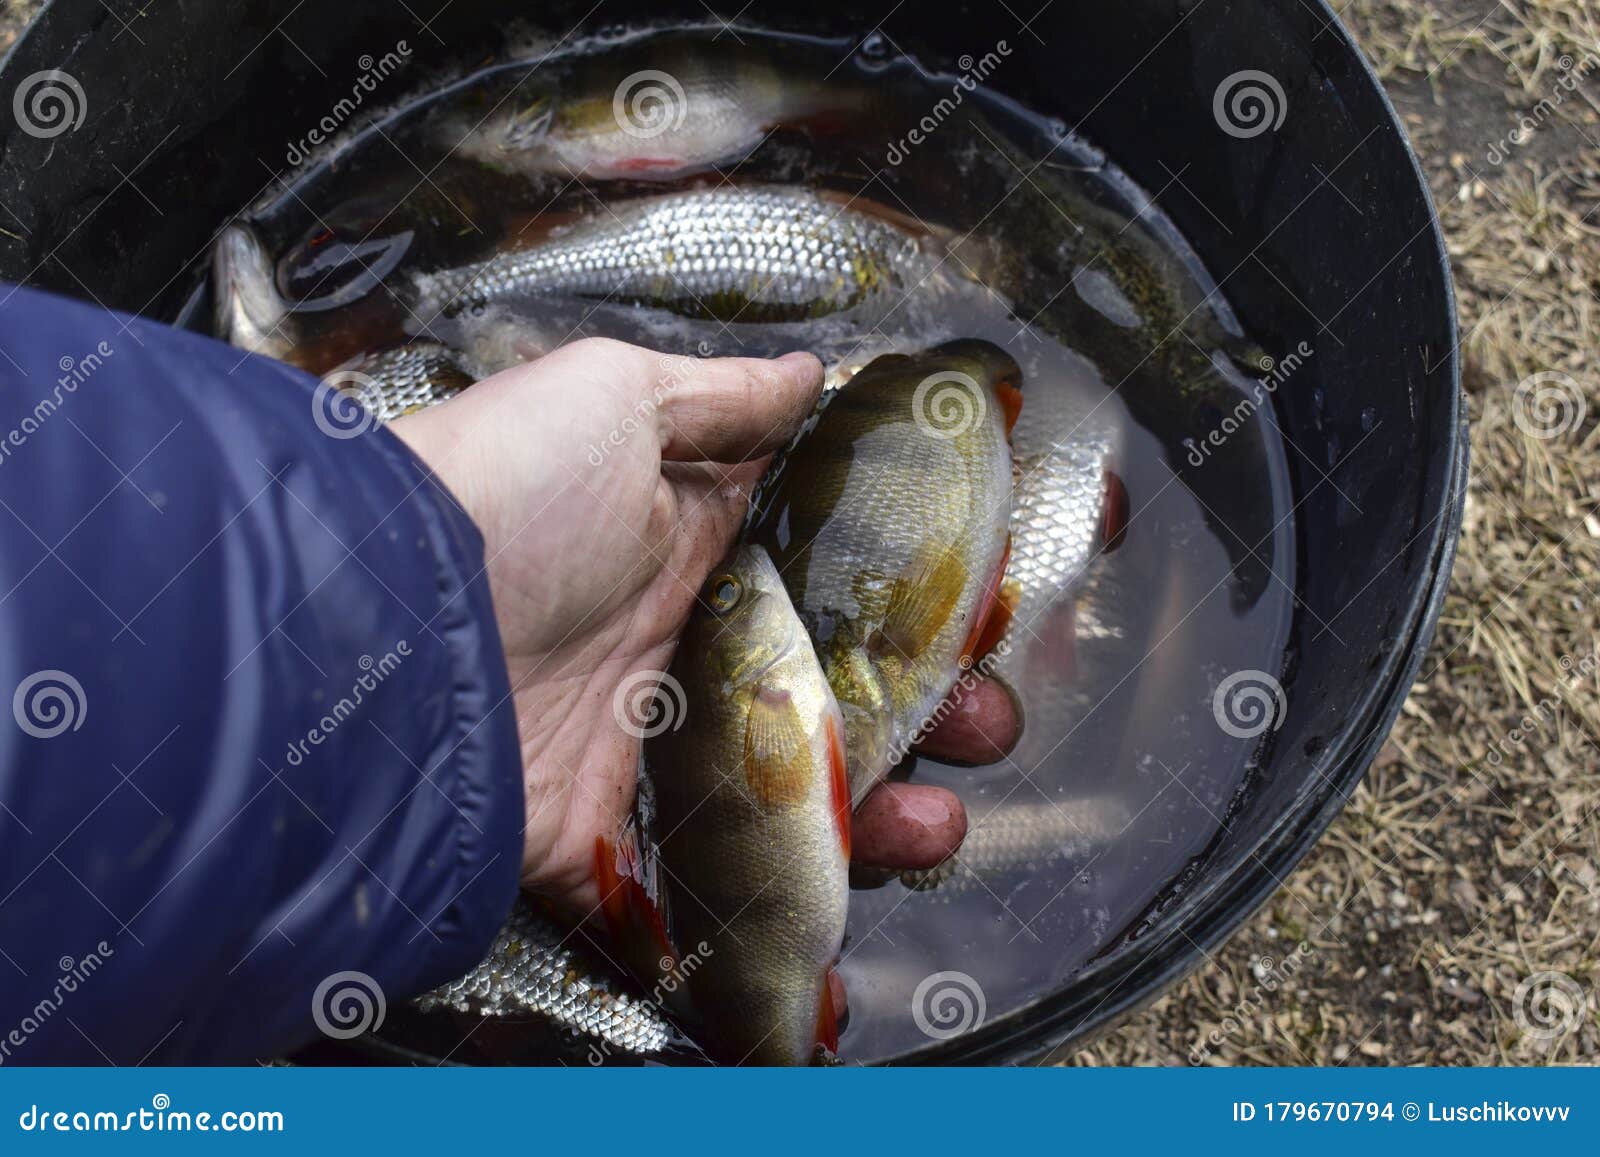 Different Freshly Caught River Fish in the Summer Stock Photo